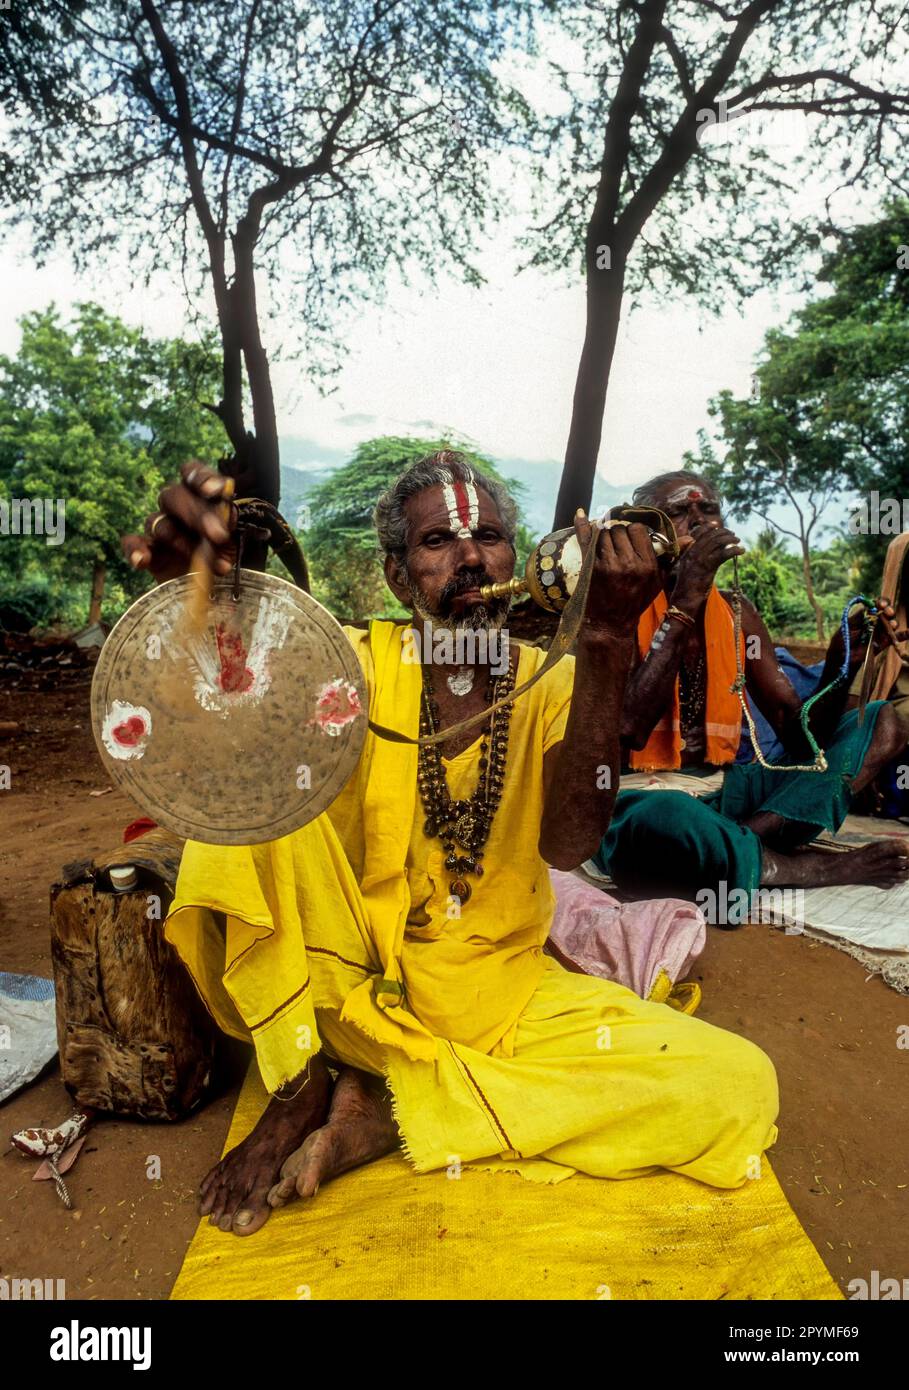 A Sadhu beating and blowing a conch shell at Nellithurai near Mettupalayam, Tamil Nadu, South India, India, Asia Stock Photo